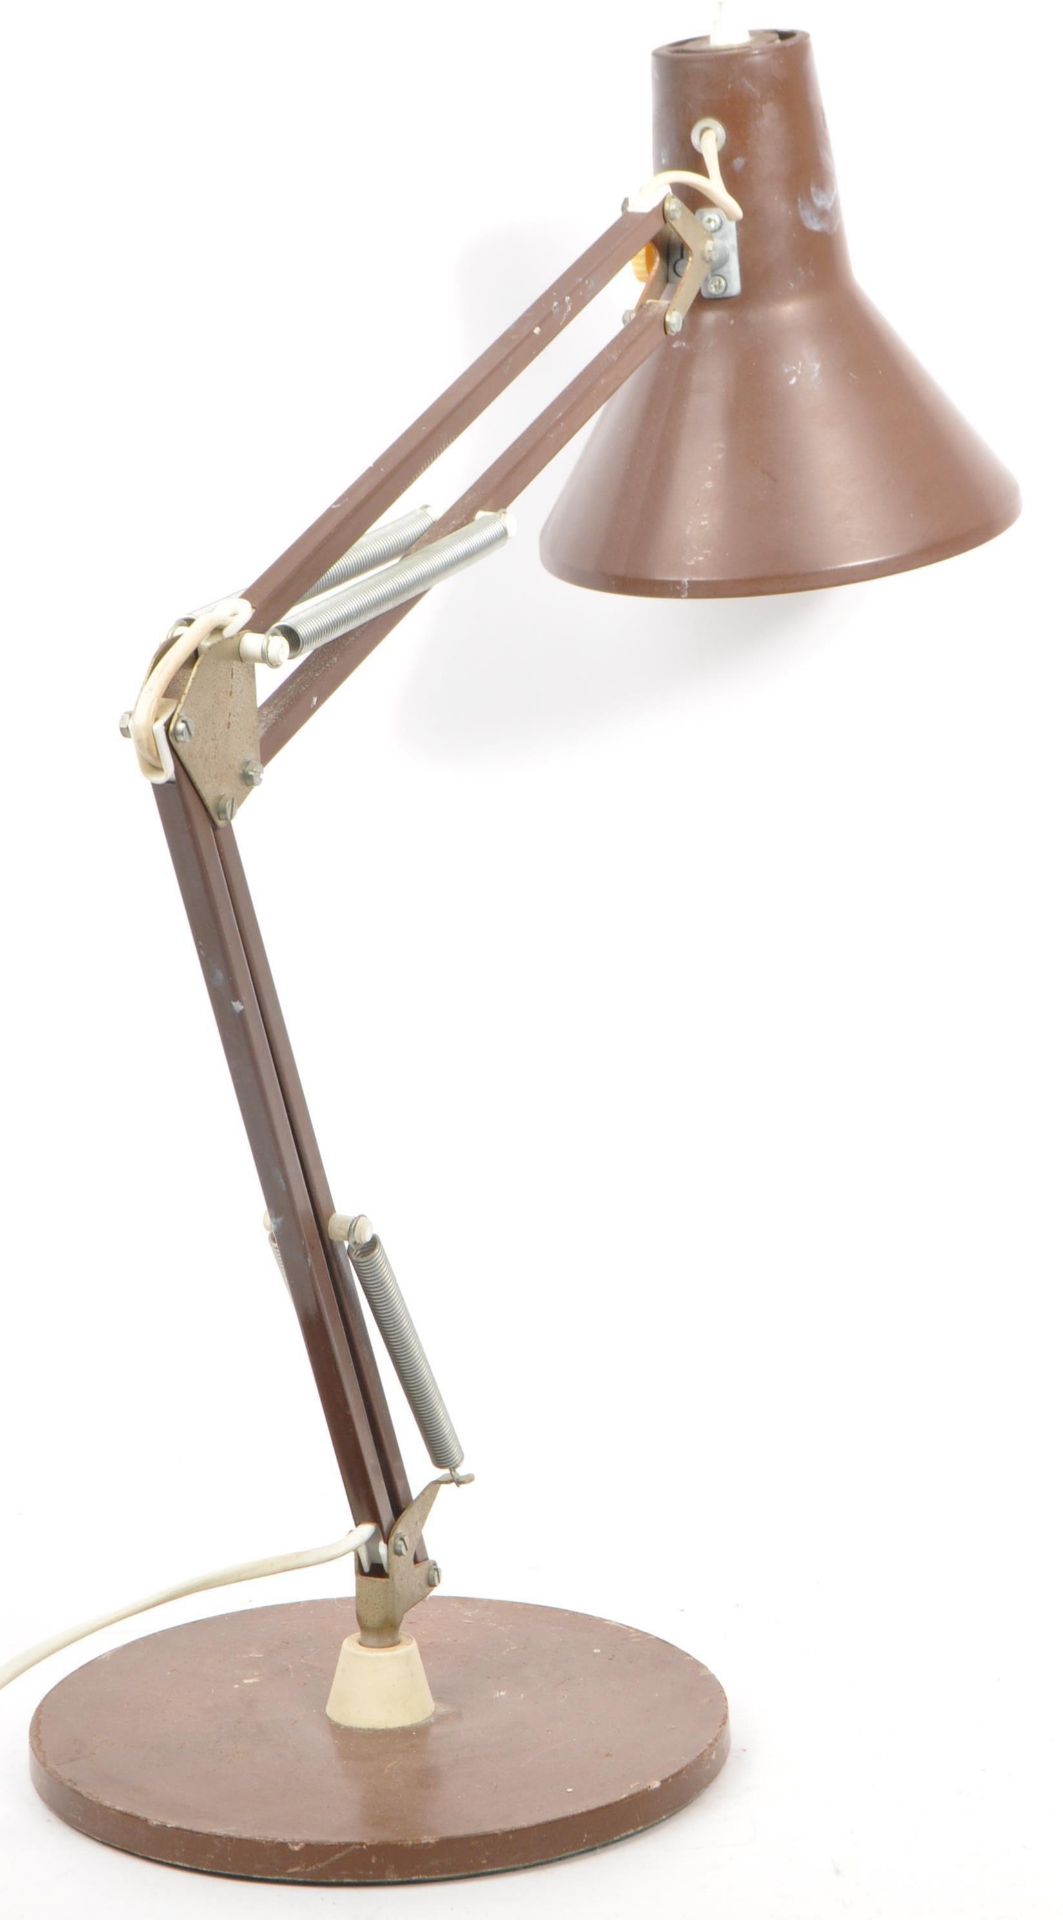 MID 20TH CENTURY INDUSTRIAL FACTORY TABLE DESK LAMP - Image 2 of 5